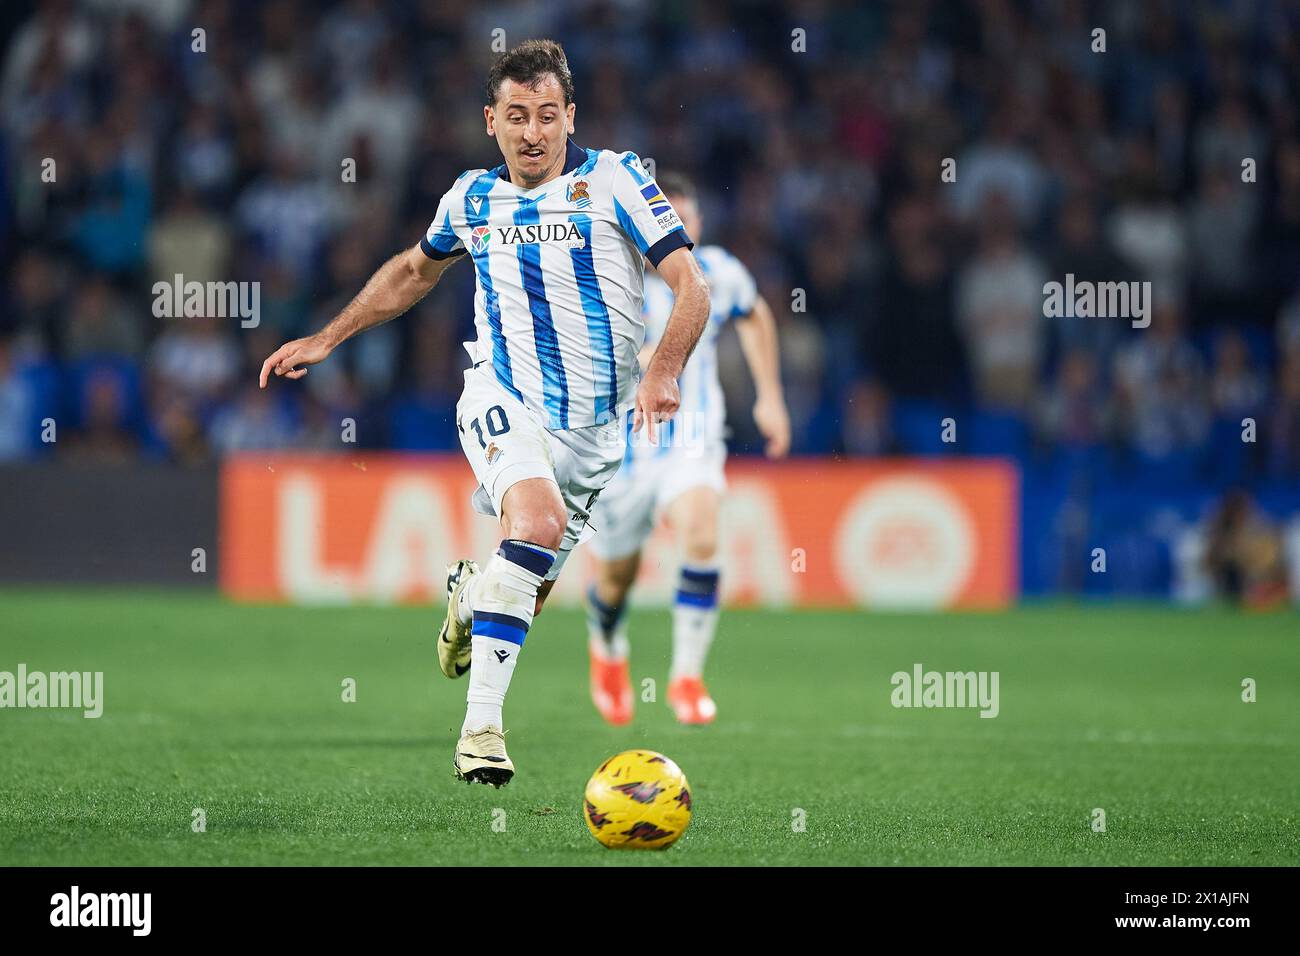 Mikel Oyarzabal of Real Sociedad with the ball during the LaLiga EA Sports match between Real Sociedad and UD Almeria at Reale Arnea Stadium on April Stock Photo